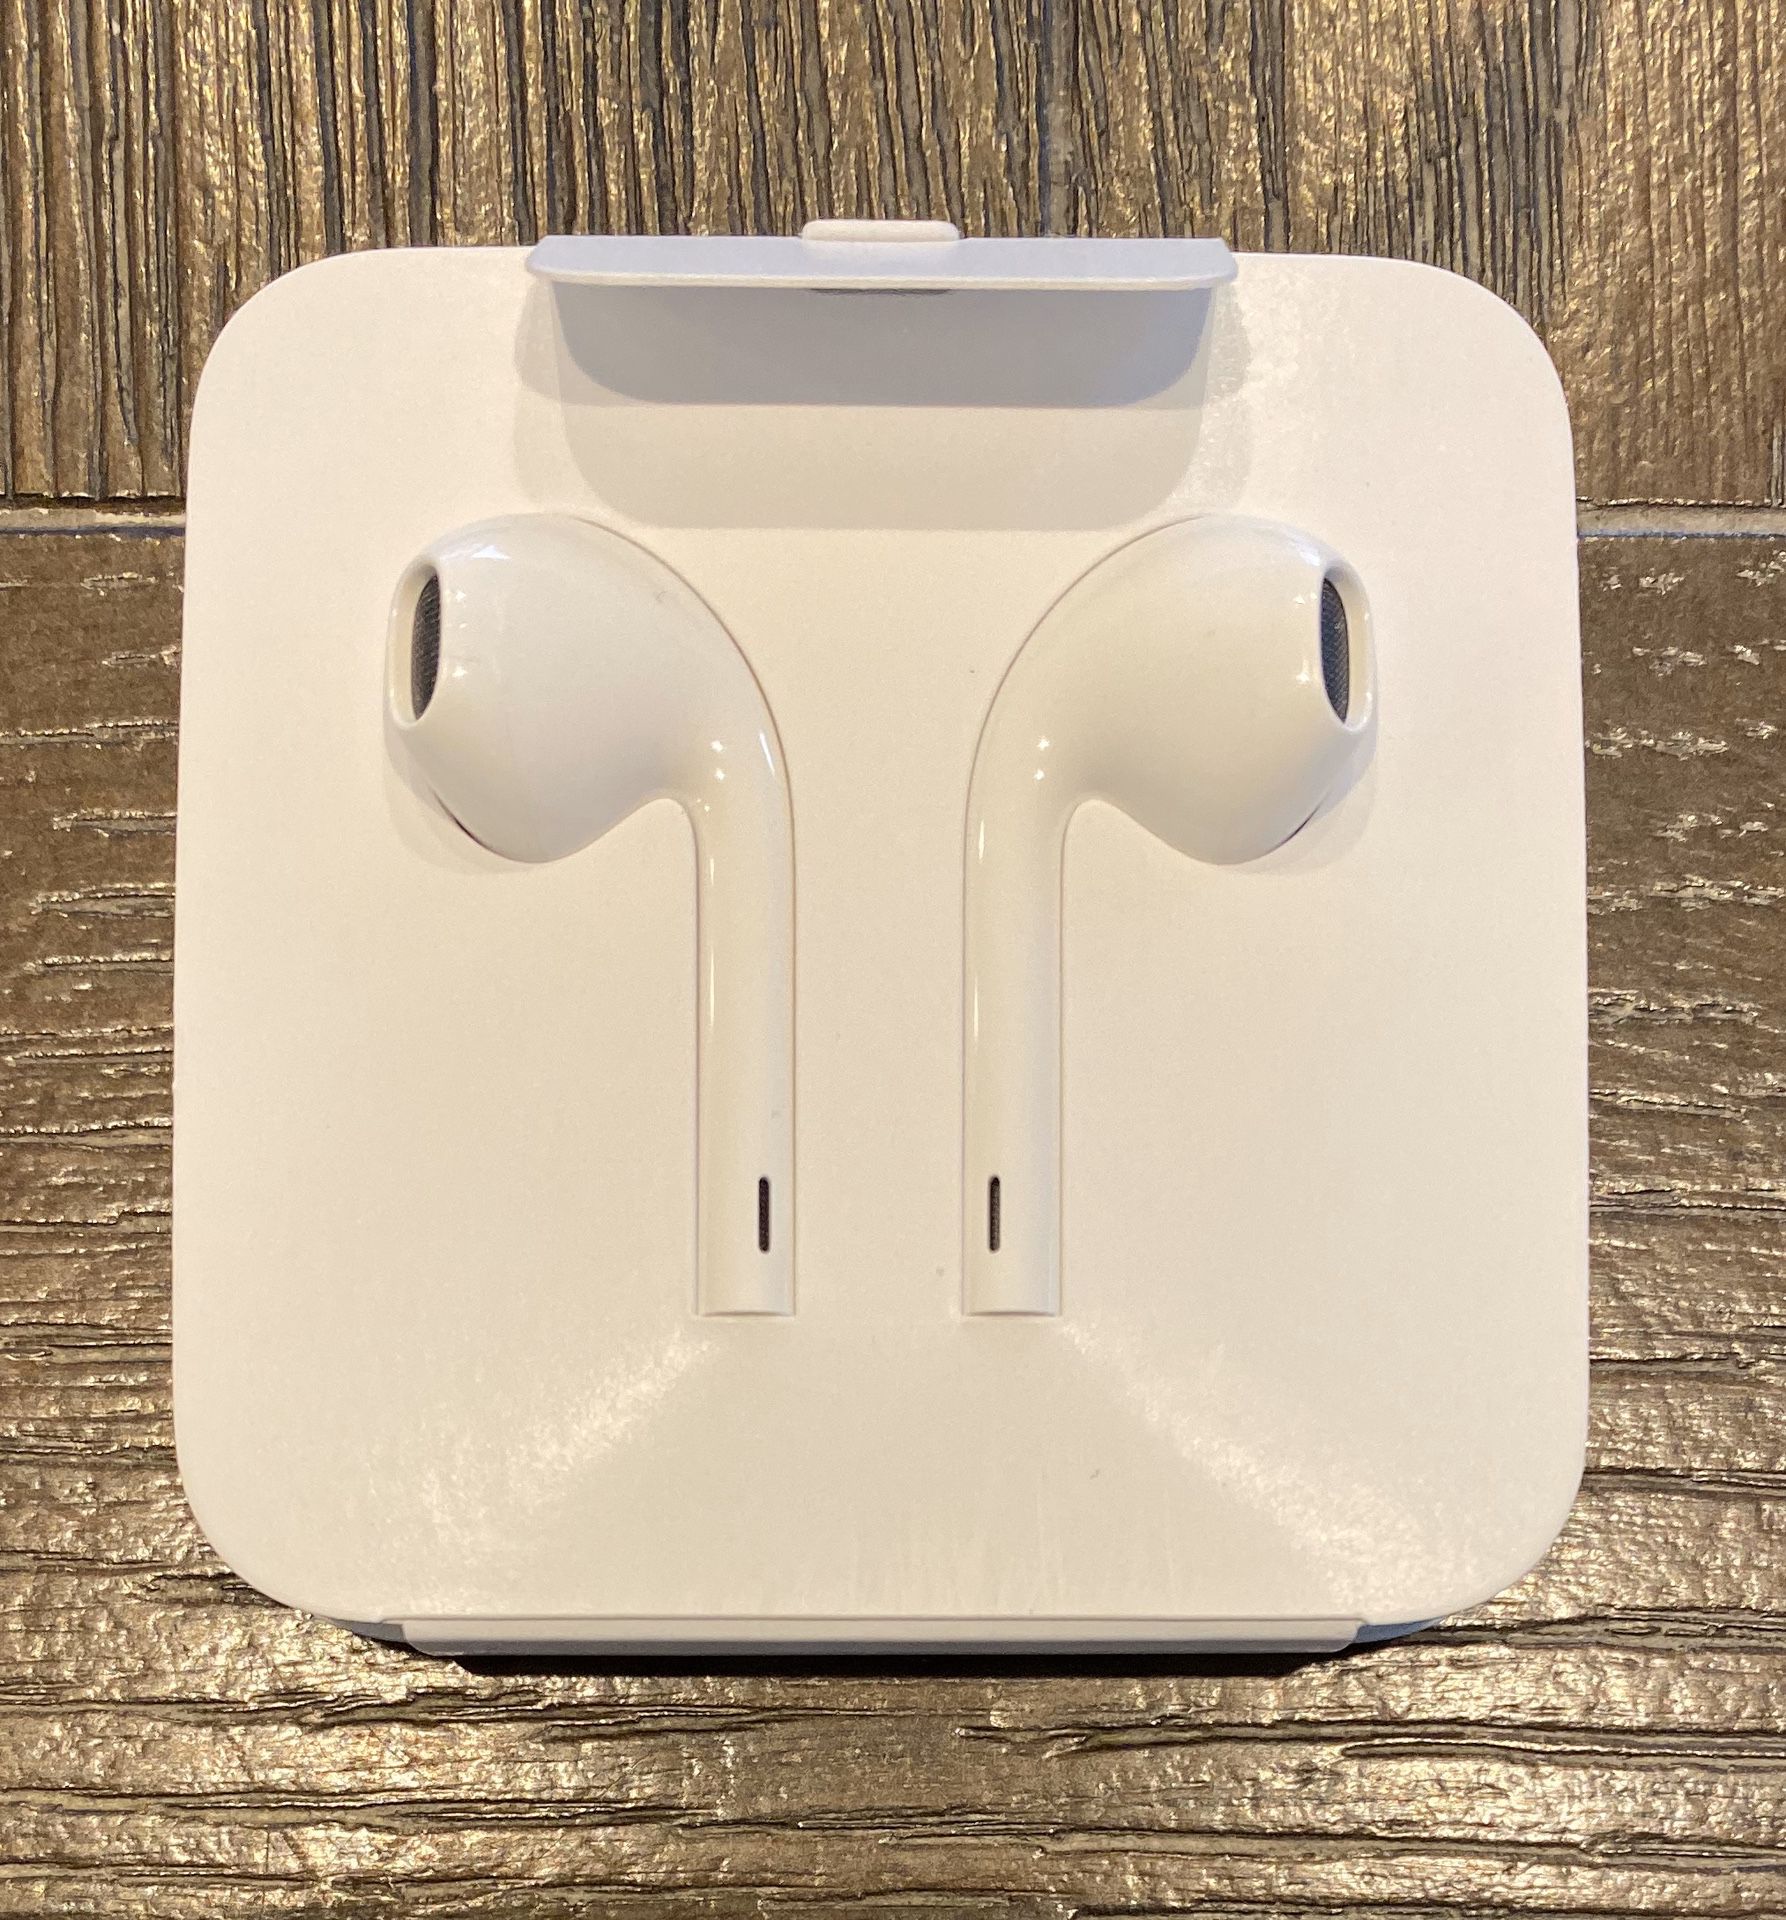 Brand new Apple Earbuds